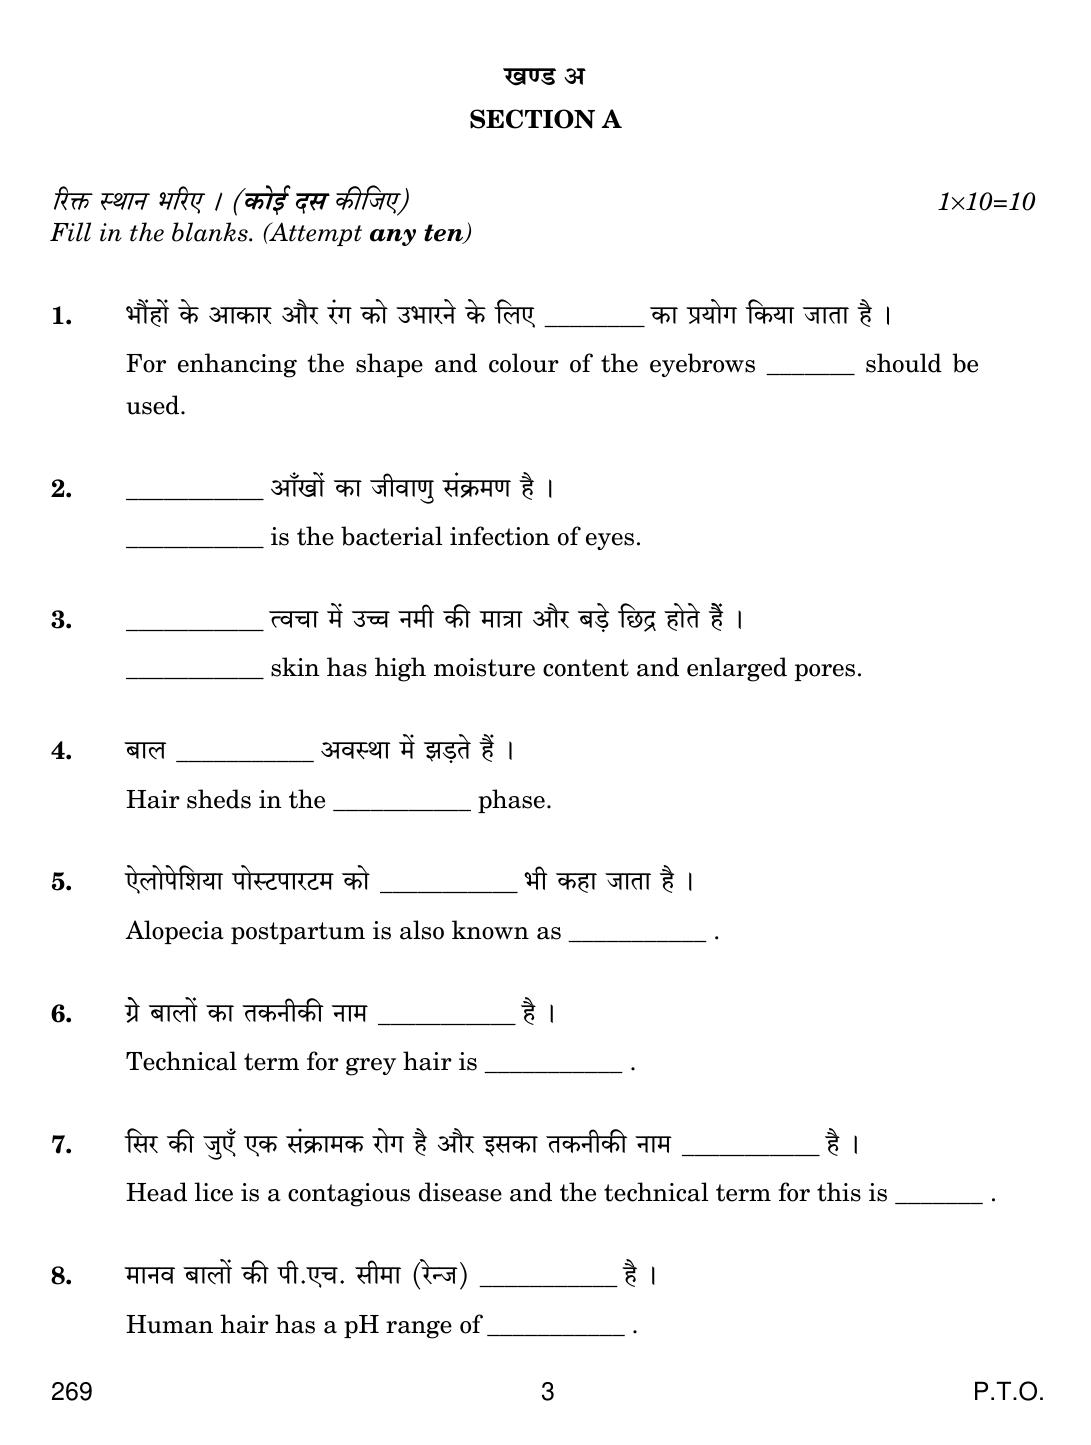 CBSE Class 12 269 Beauty And Hair 2019 Question Paper - Page 3